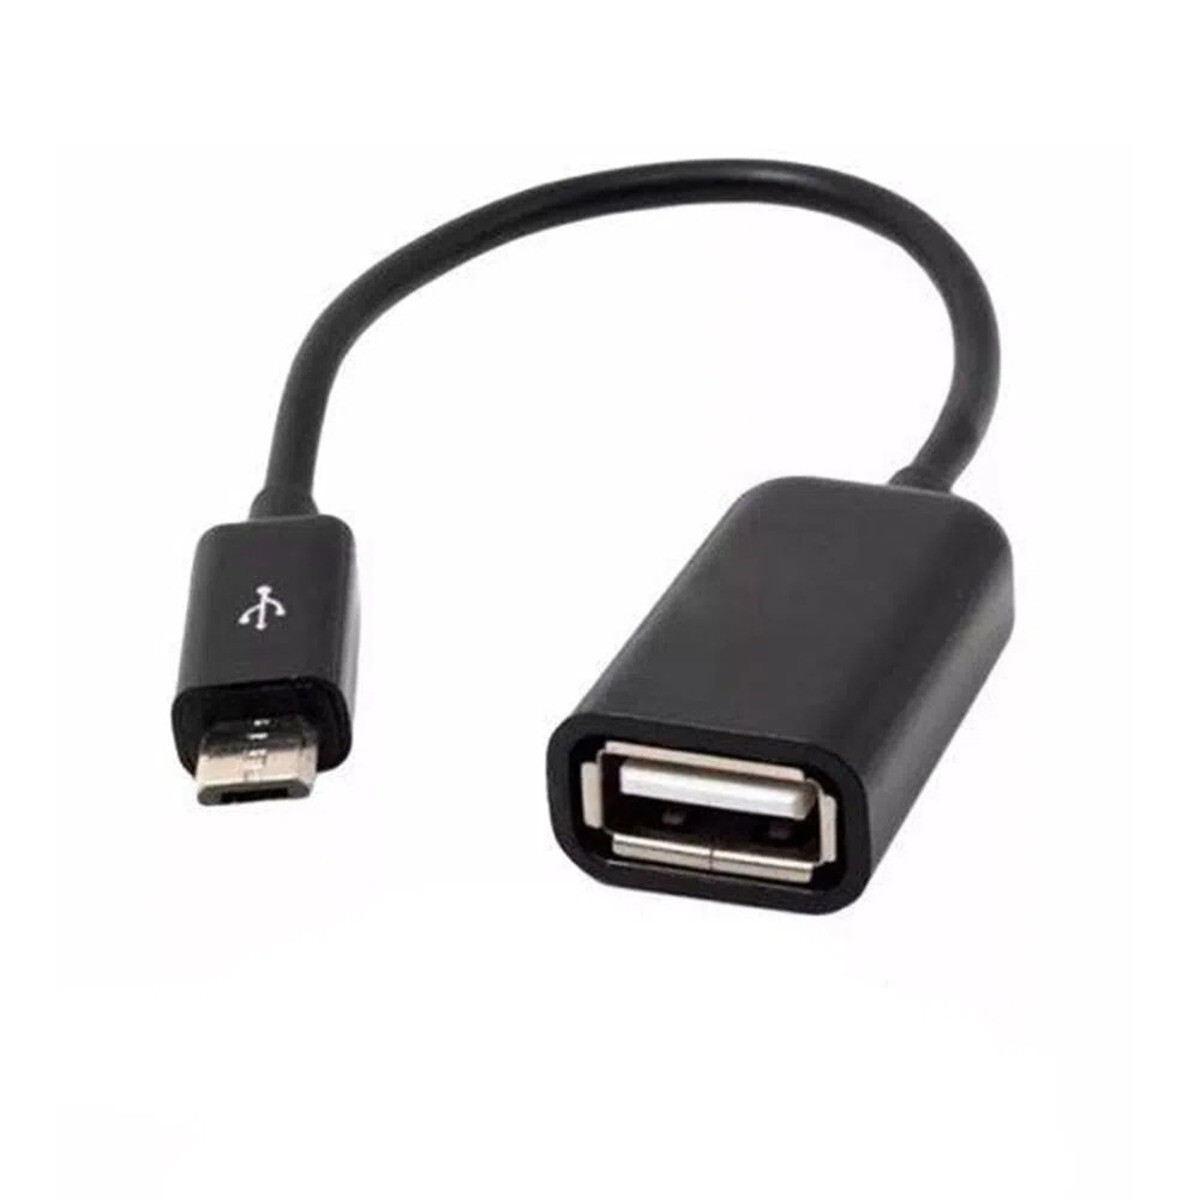 Cable USB OTG - Micro USB / USB A Hembra OEM - Cable Usb Otg - Micro Usb / Usb A Hembra Oem 